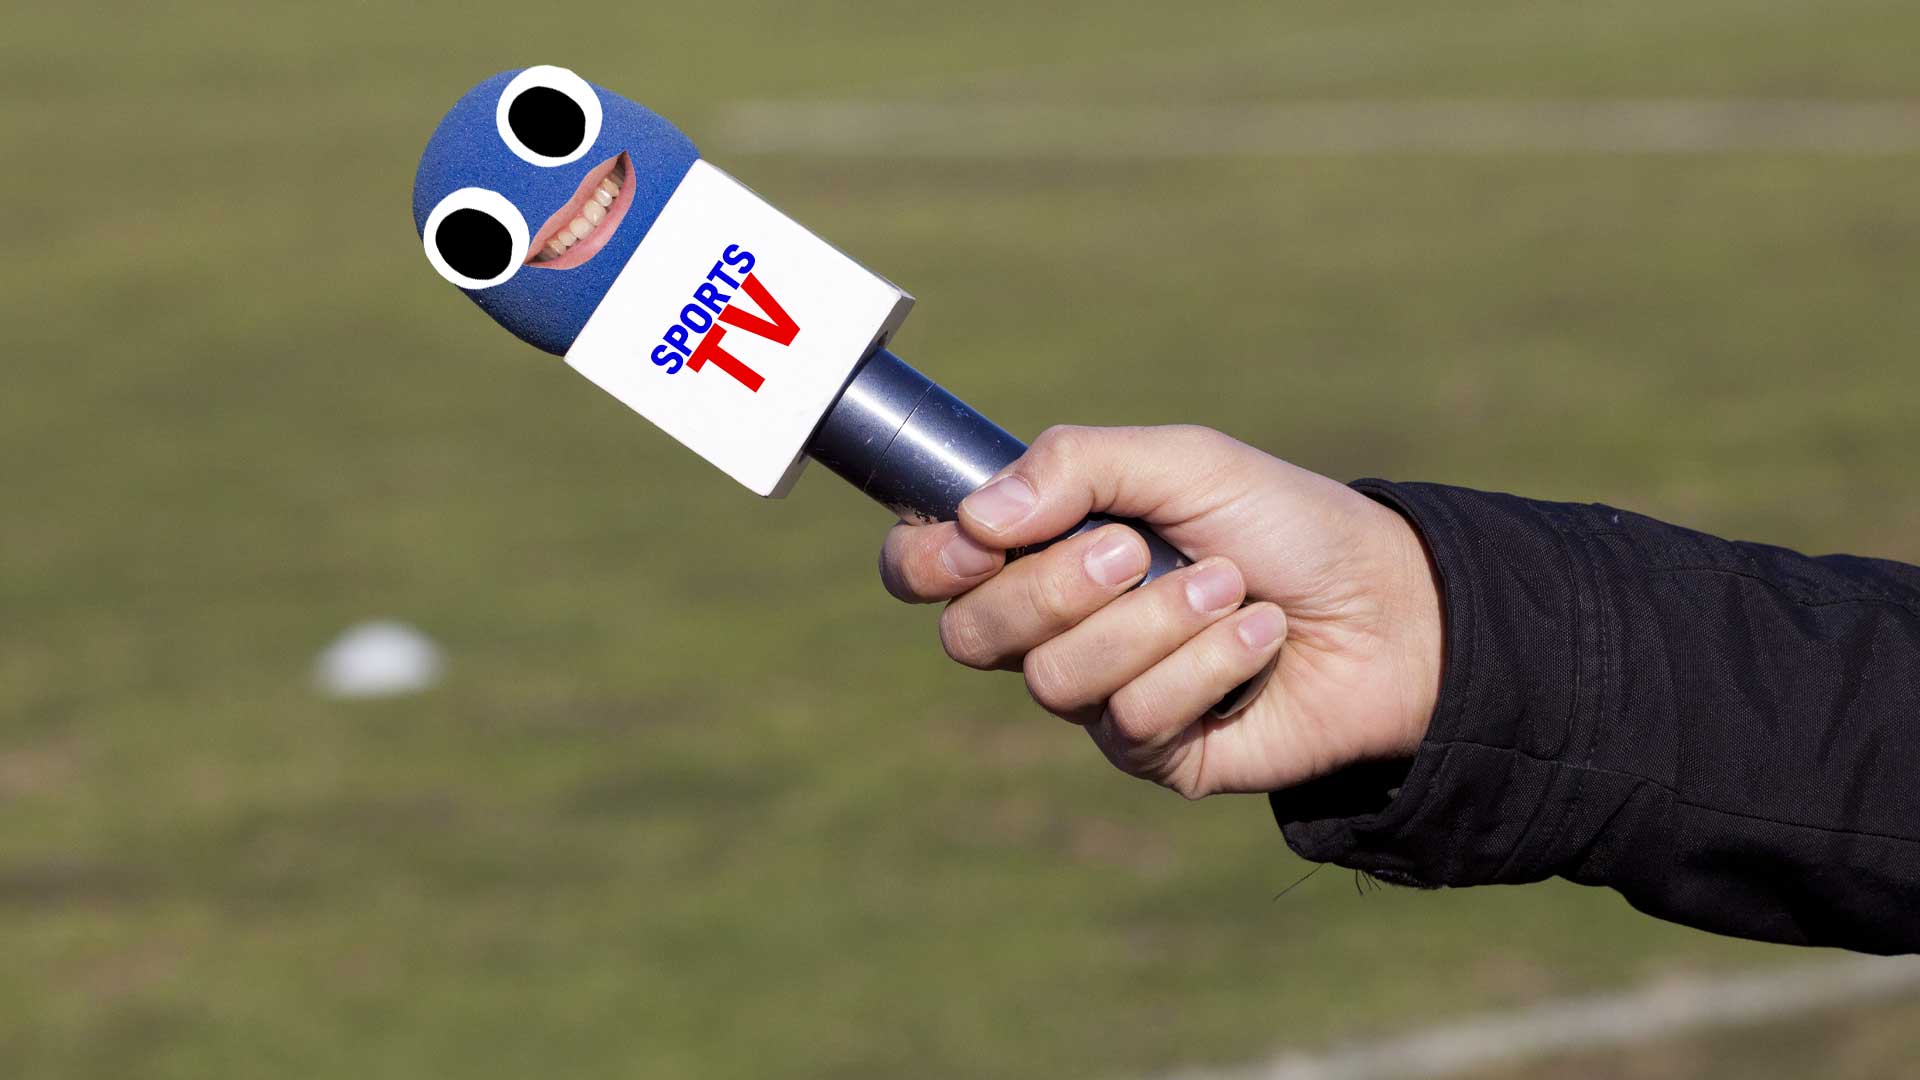 Sports commentator's microphone